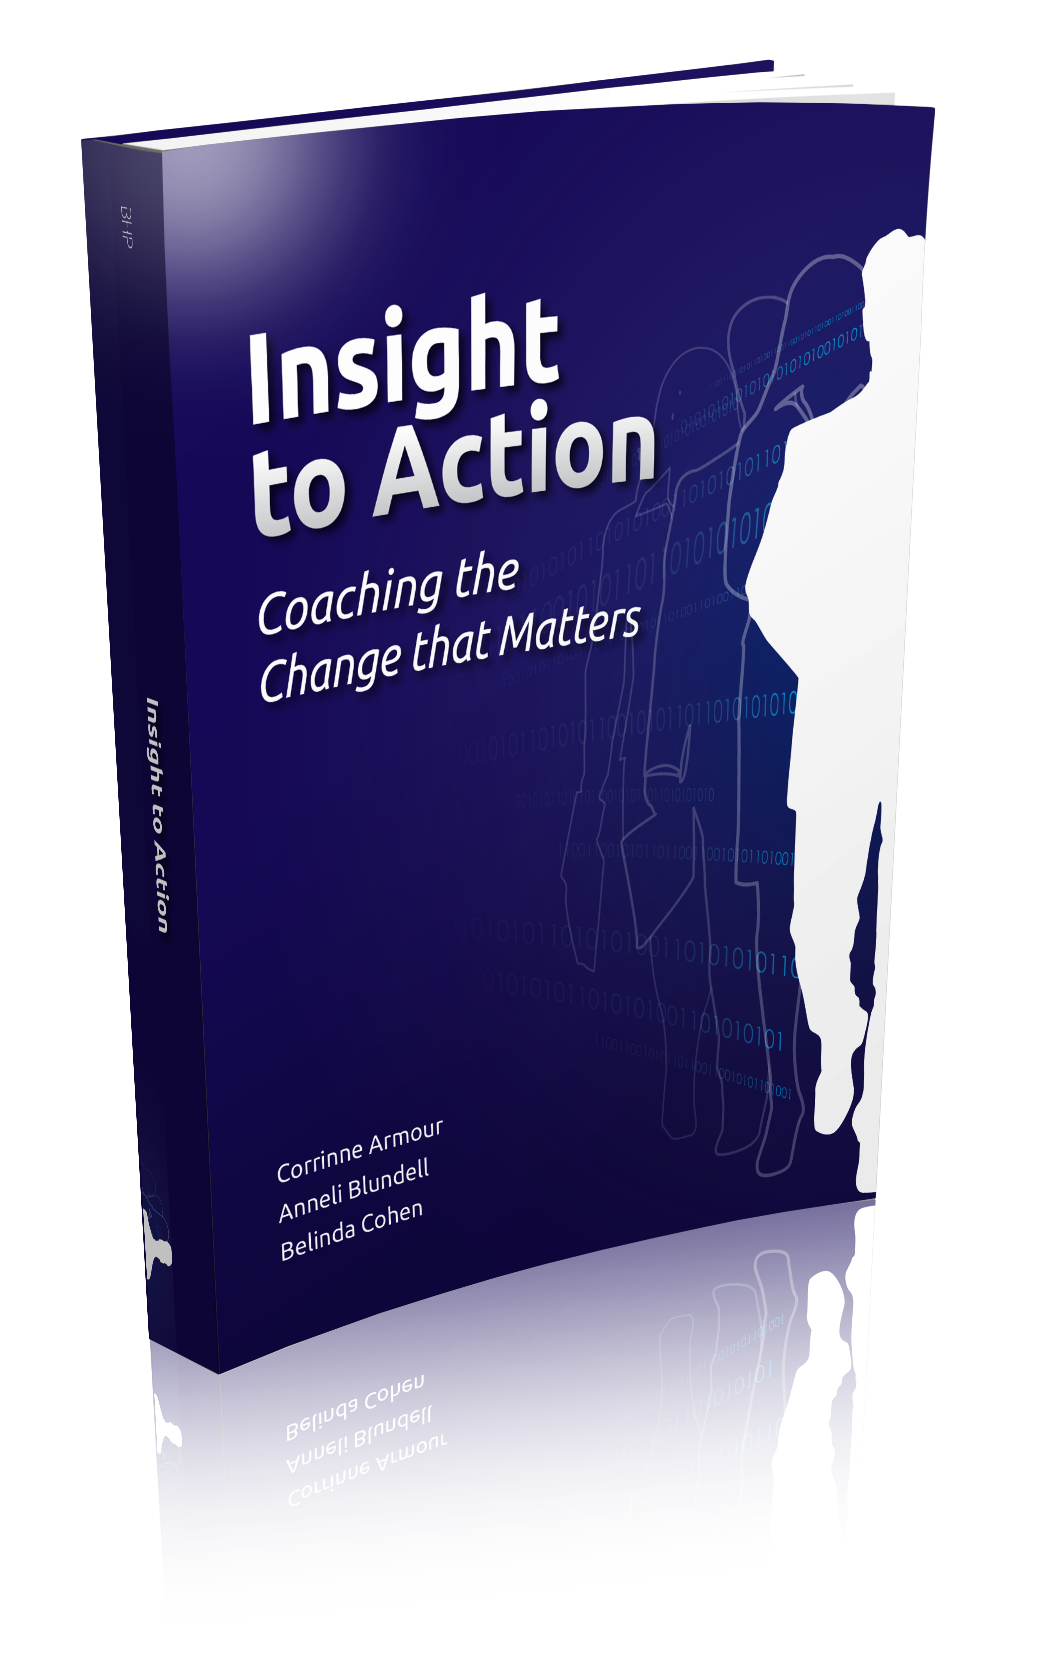 Insight to Action-Cover Mockup_PRINT.png